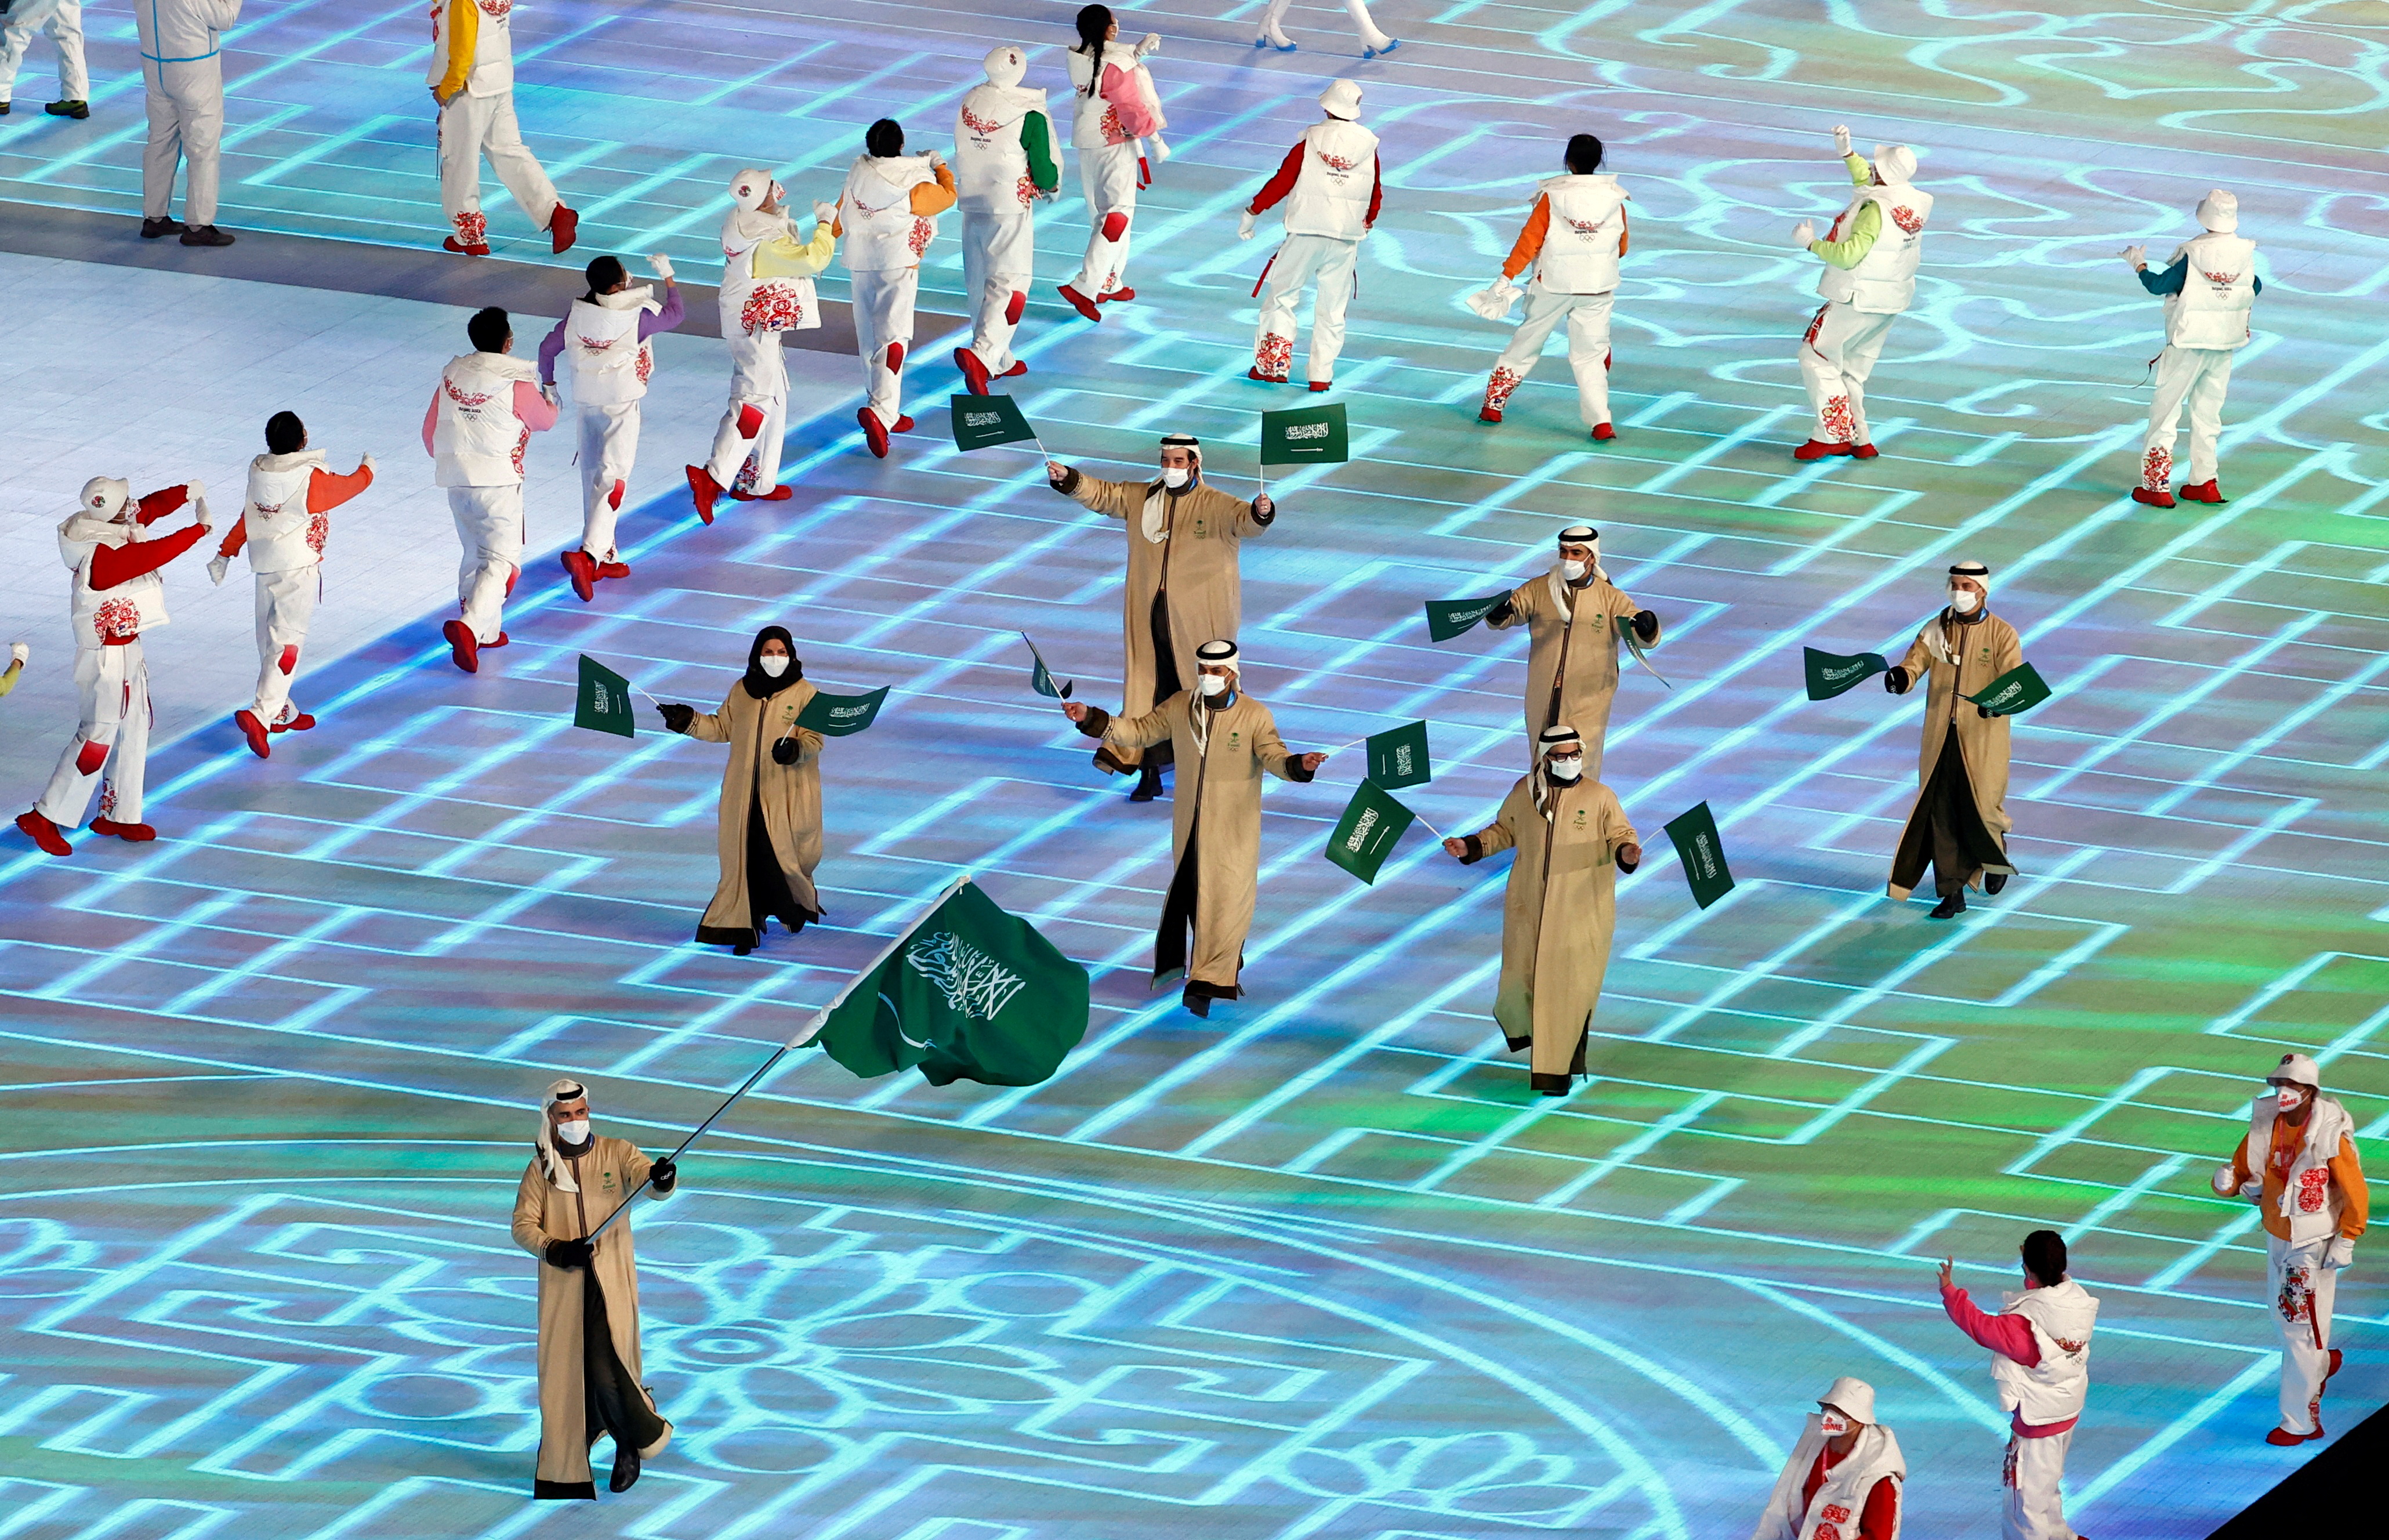 2022 Beijing Olympics - Opening Ceremony - National Stadium, Beijing, China - February 4, 2022. Flag bearer Fayik Abdi of Saudi Arabia during the athletes parade at the opening ceremony. REUTERS/Thomas Peter     SEARCH "OLYMPICS DAY 1" FOR BEIJING 2022 WINTER OLYMPICS EDITOR'S CHOICE, SEARCH "REUTERS OLYMPICS TOPIX" FOR ALL EDITOR'S CHOICE PICTURES.   TPX IMAGES OF THE DAY